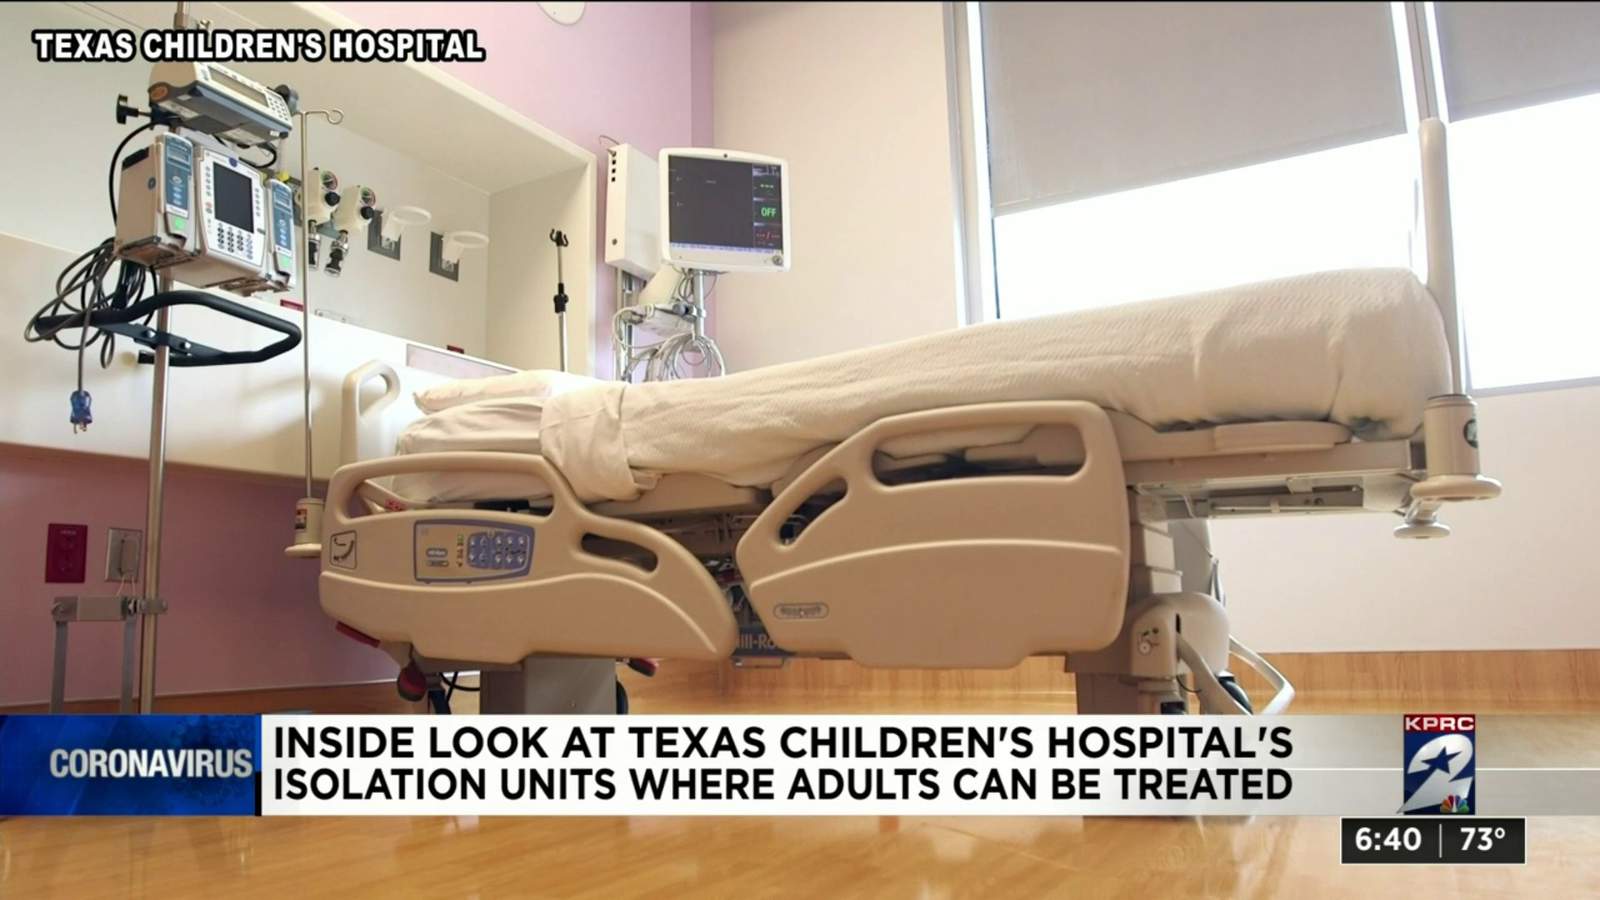 Inside the Texas Childrens Isolation Unit that is treating adults with COVID-19